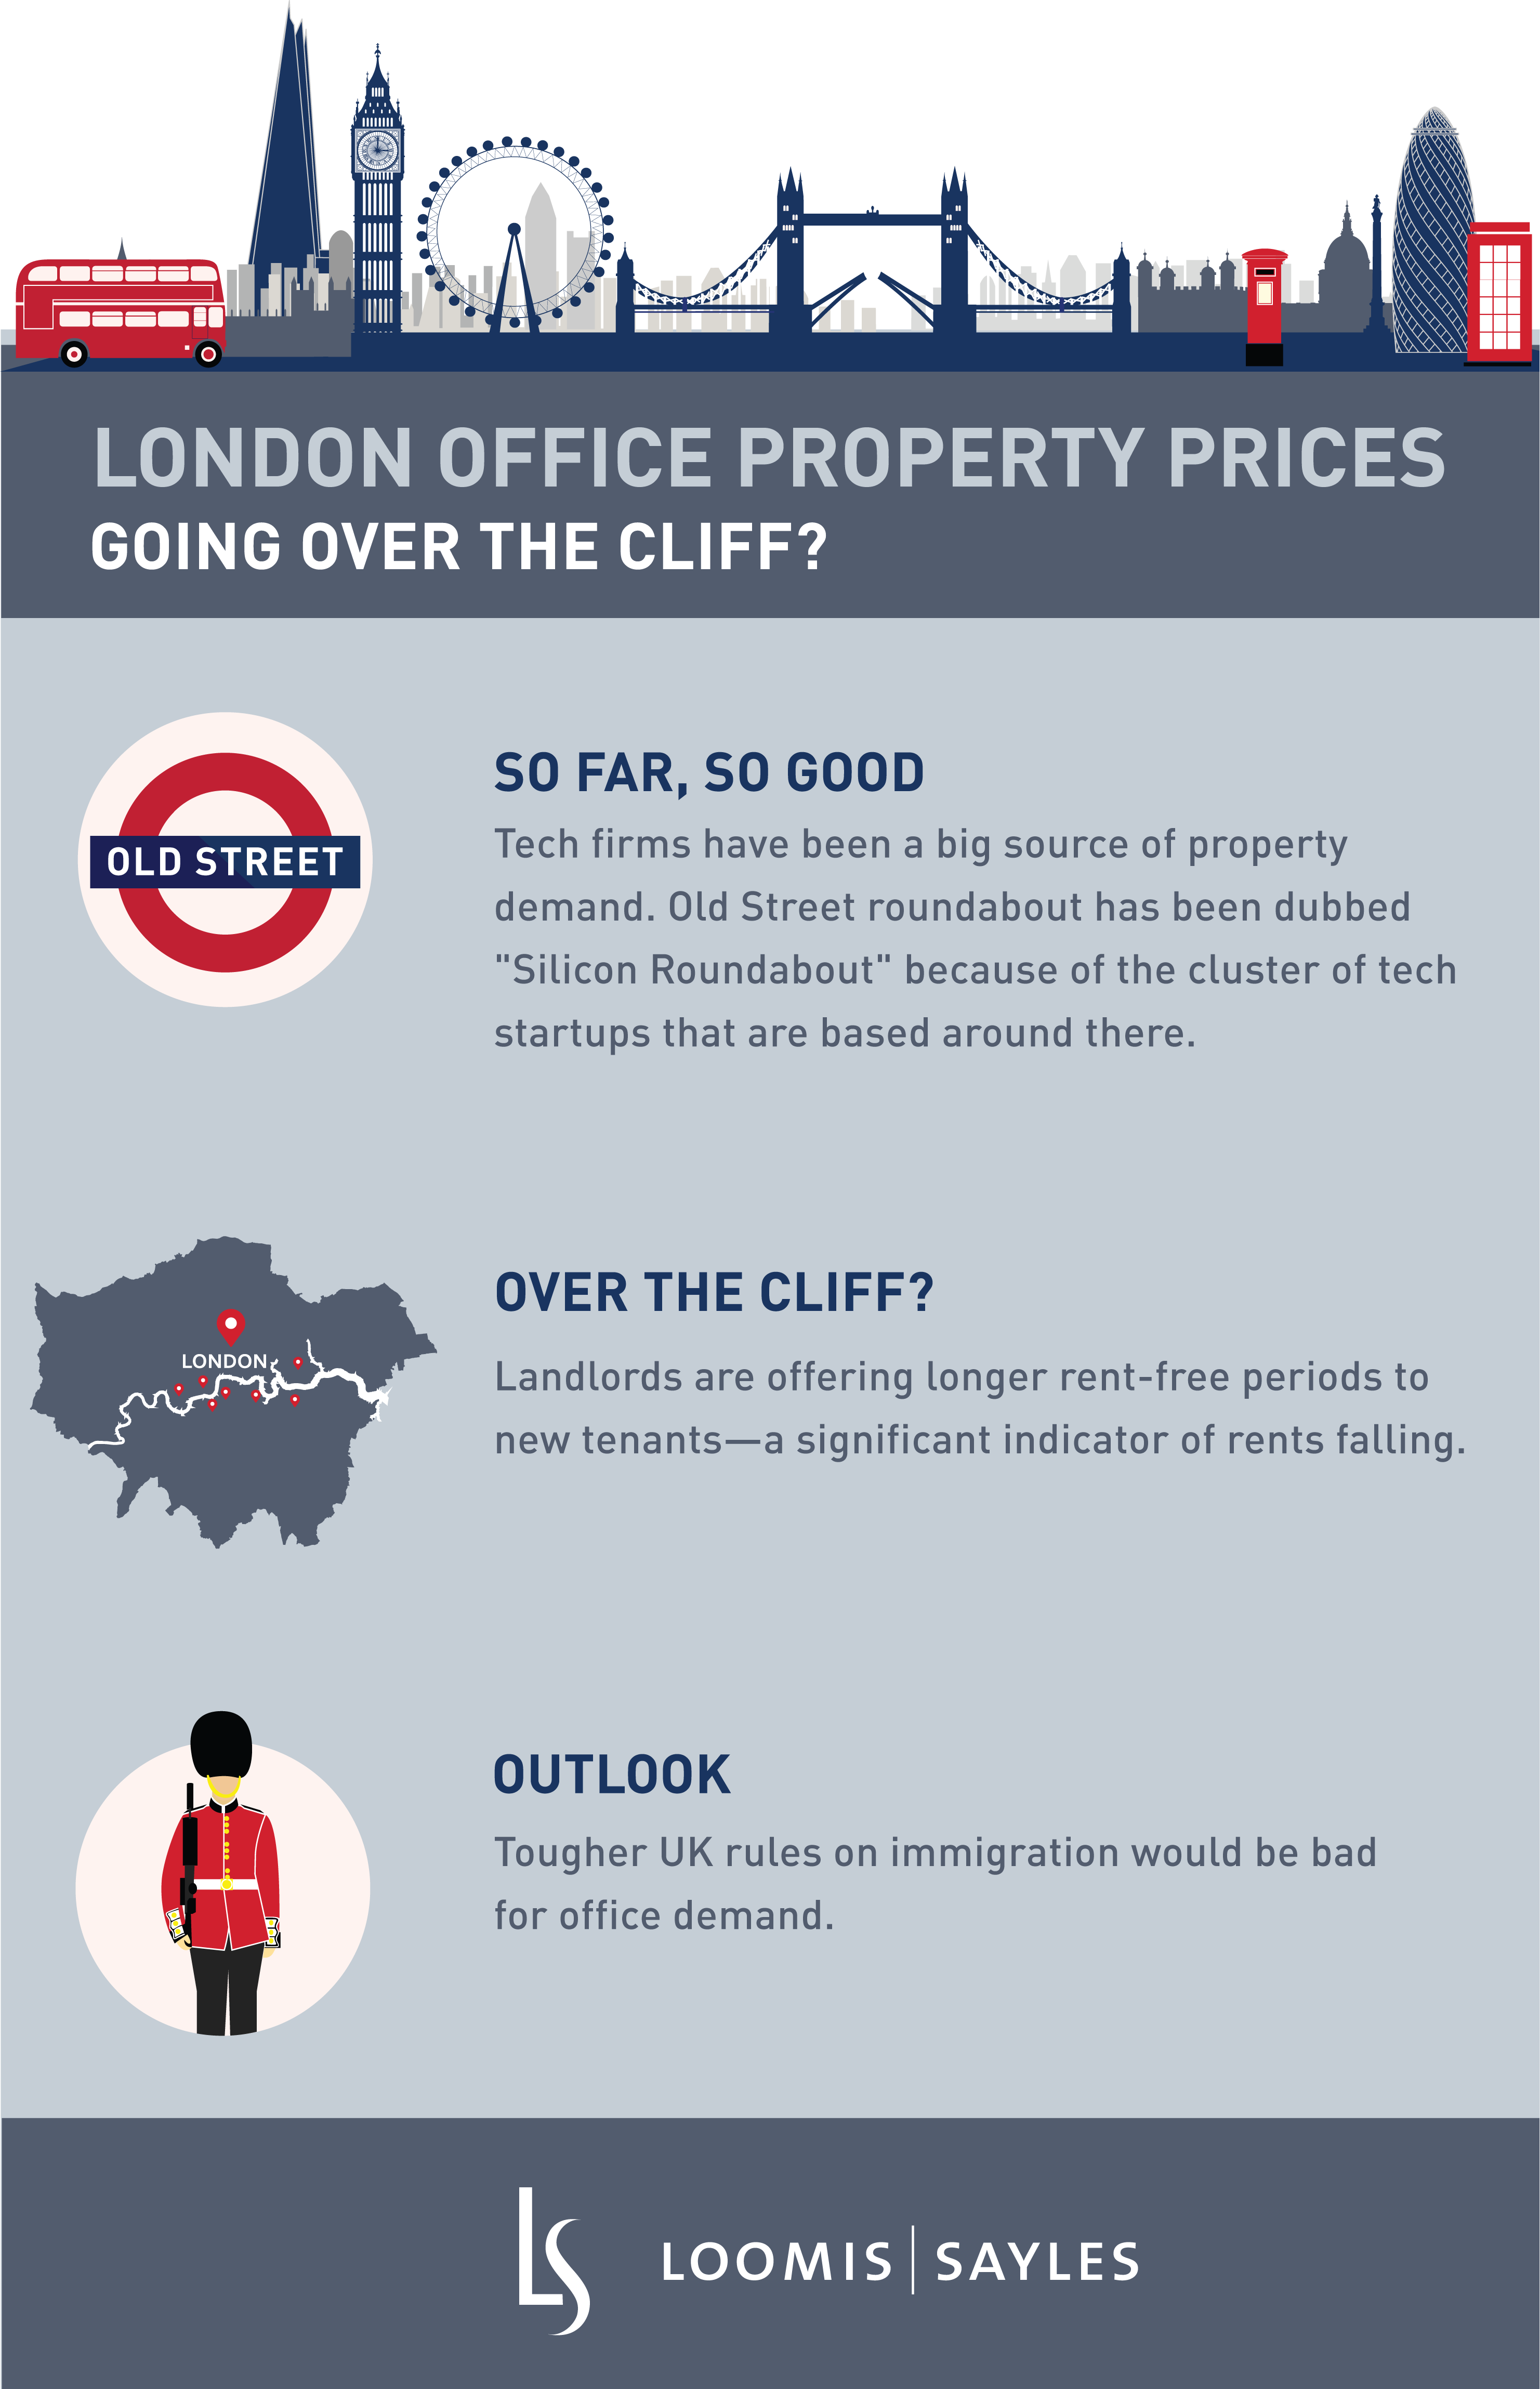 London Office Property Prices – Going Over the Cliff?